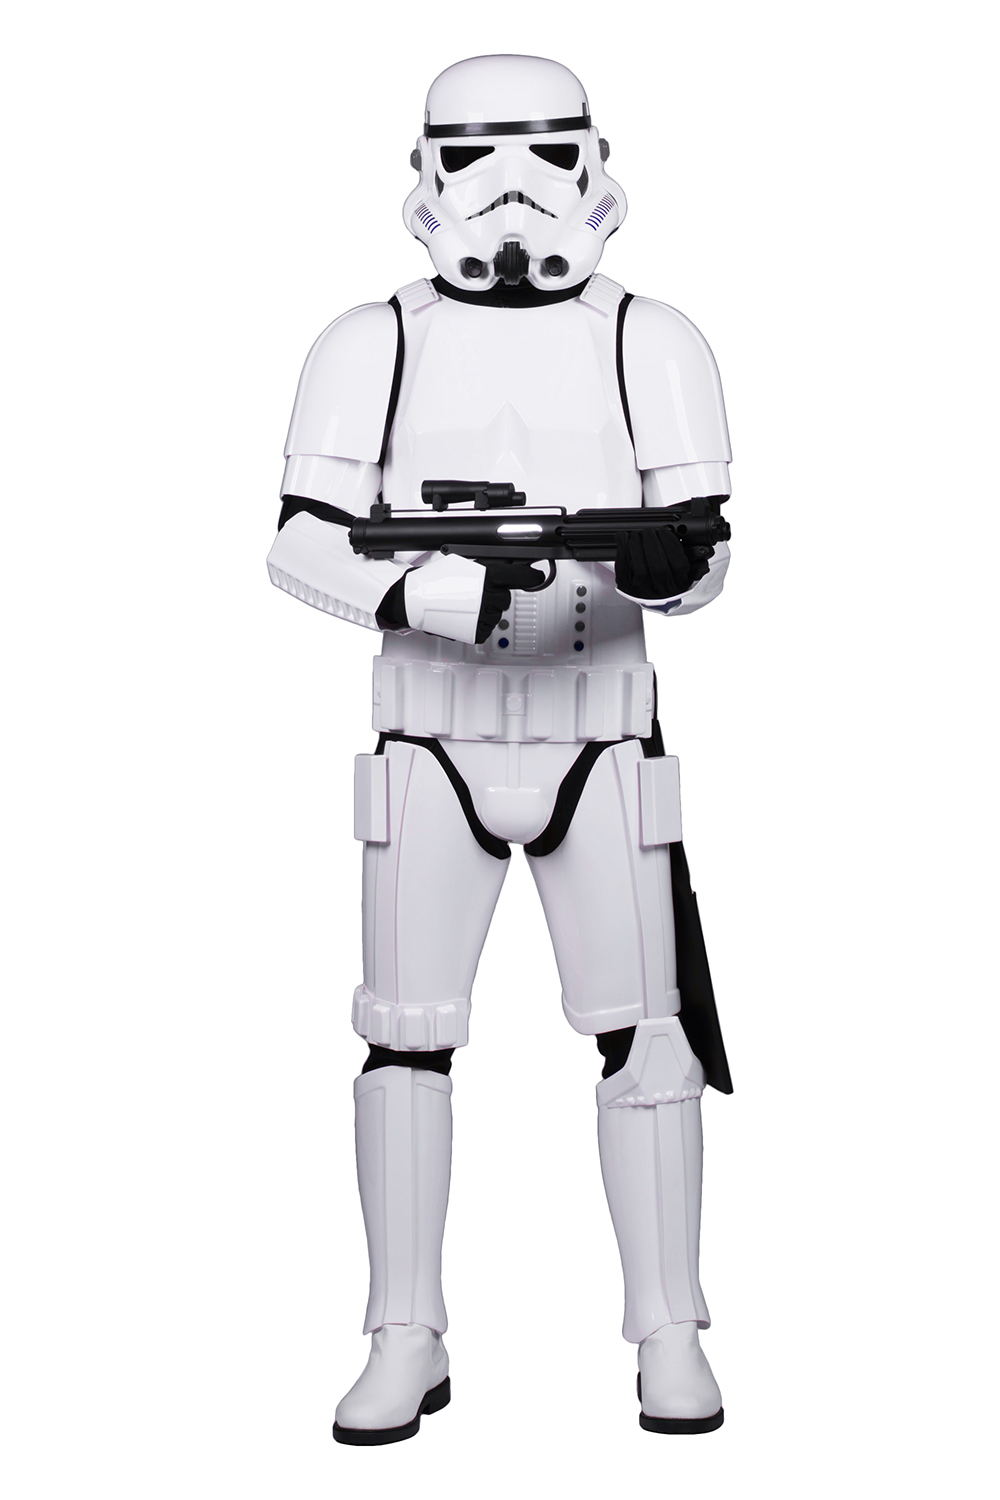 Stormtrooper Costume Armour Packages available at www.Stormtrooper-Costumes.com - The Stormtrooper Shop